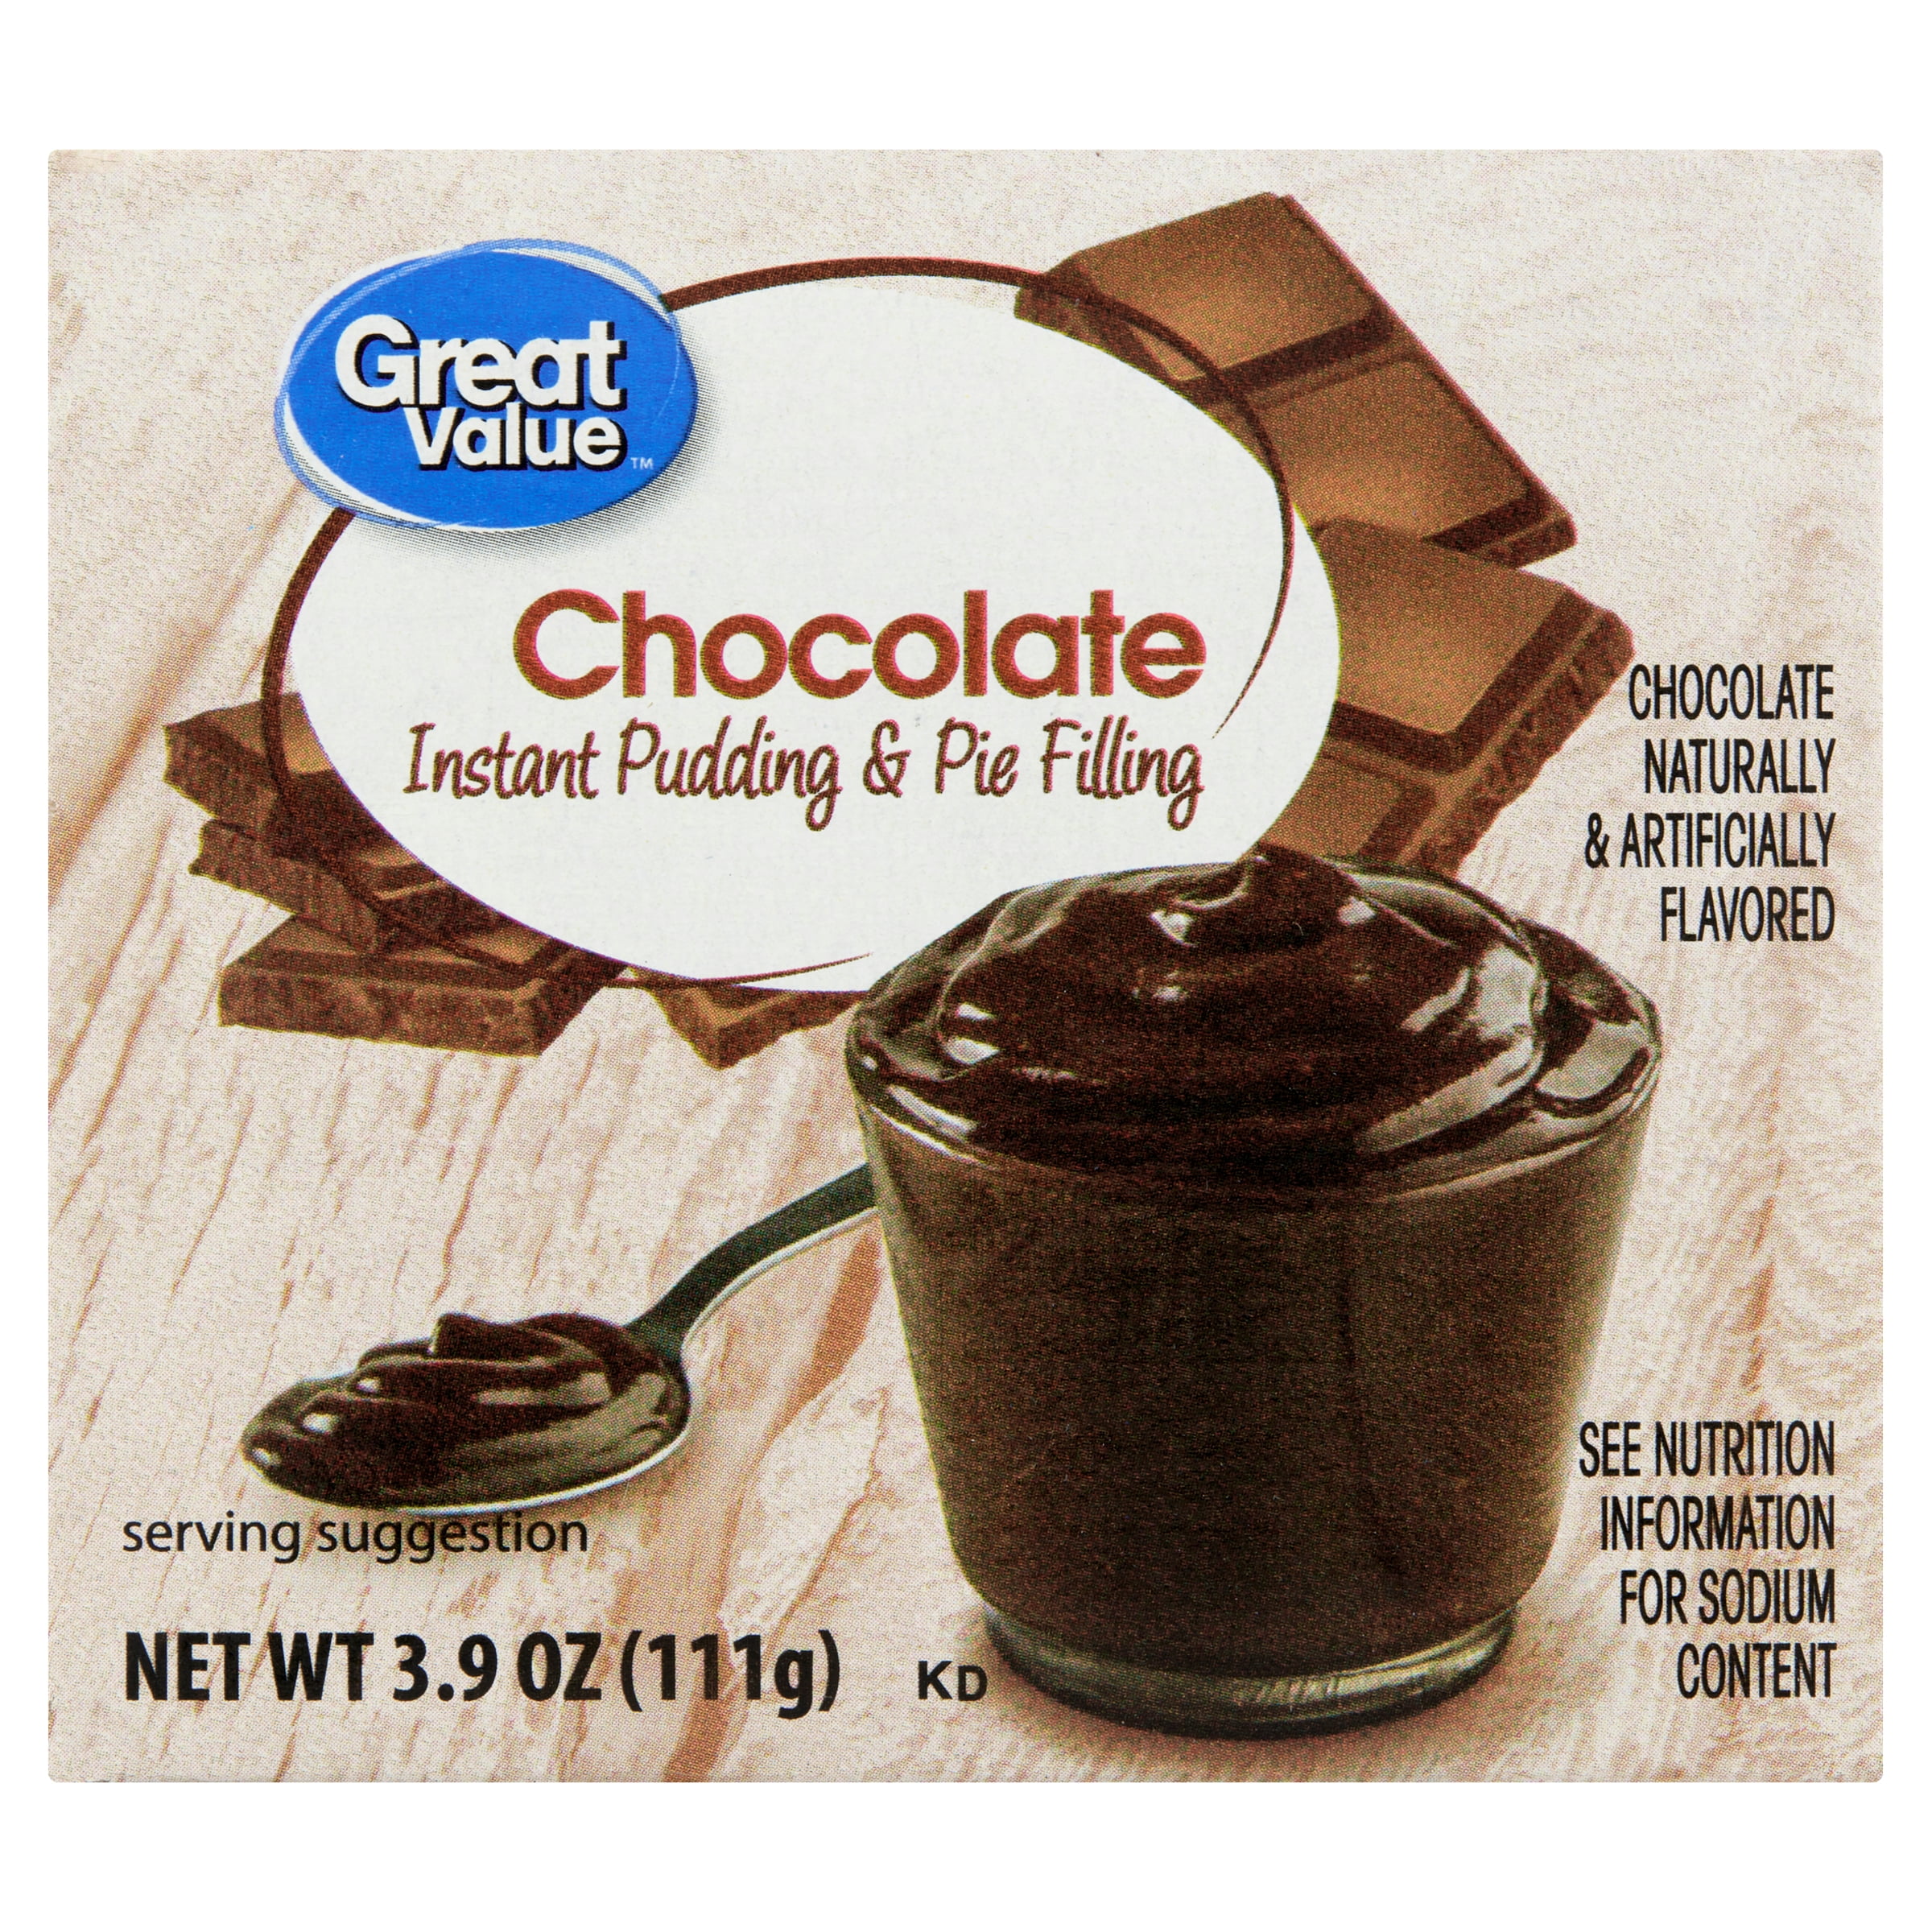 Great Value Chocolate Instant Pudding & Pie Filling, 3.9 oz